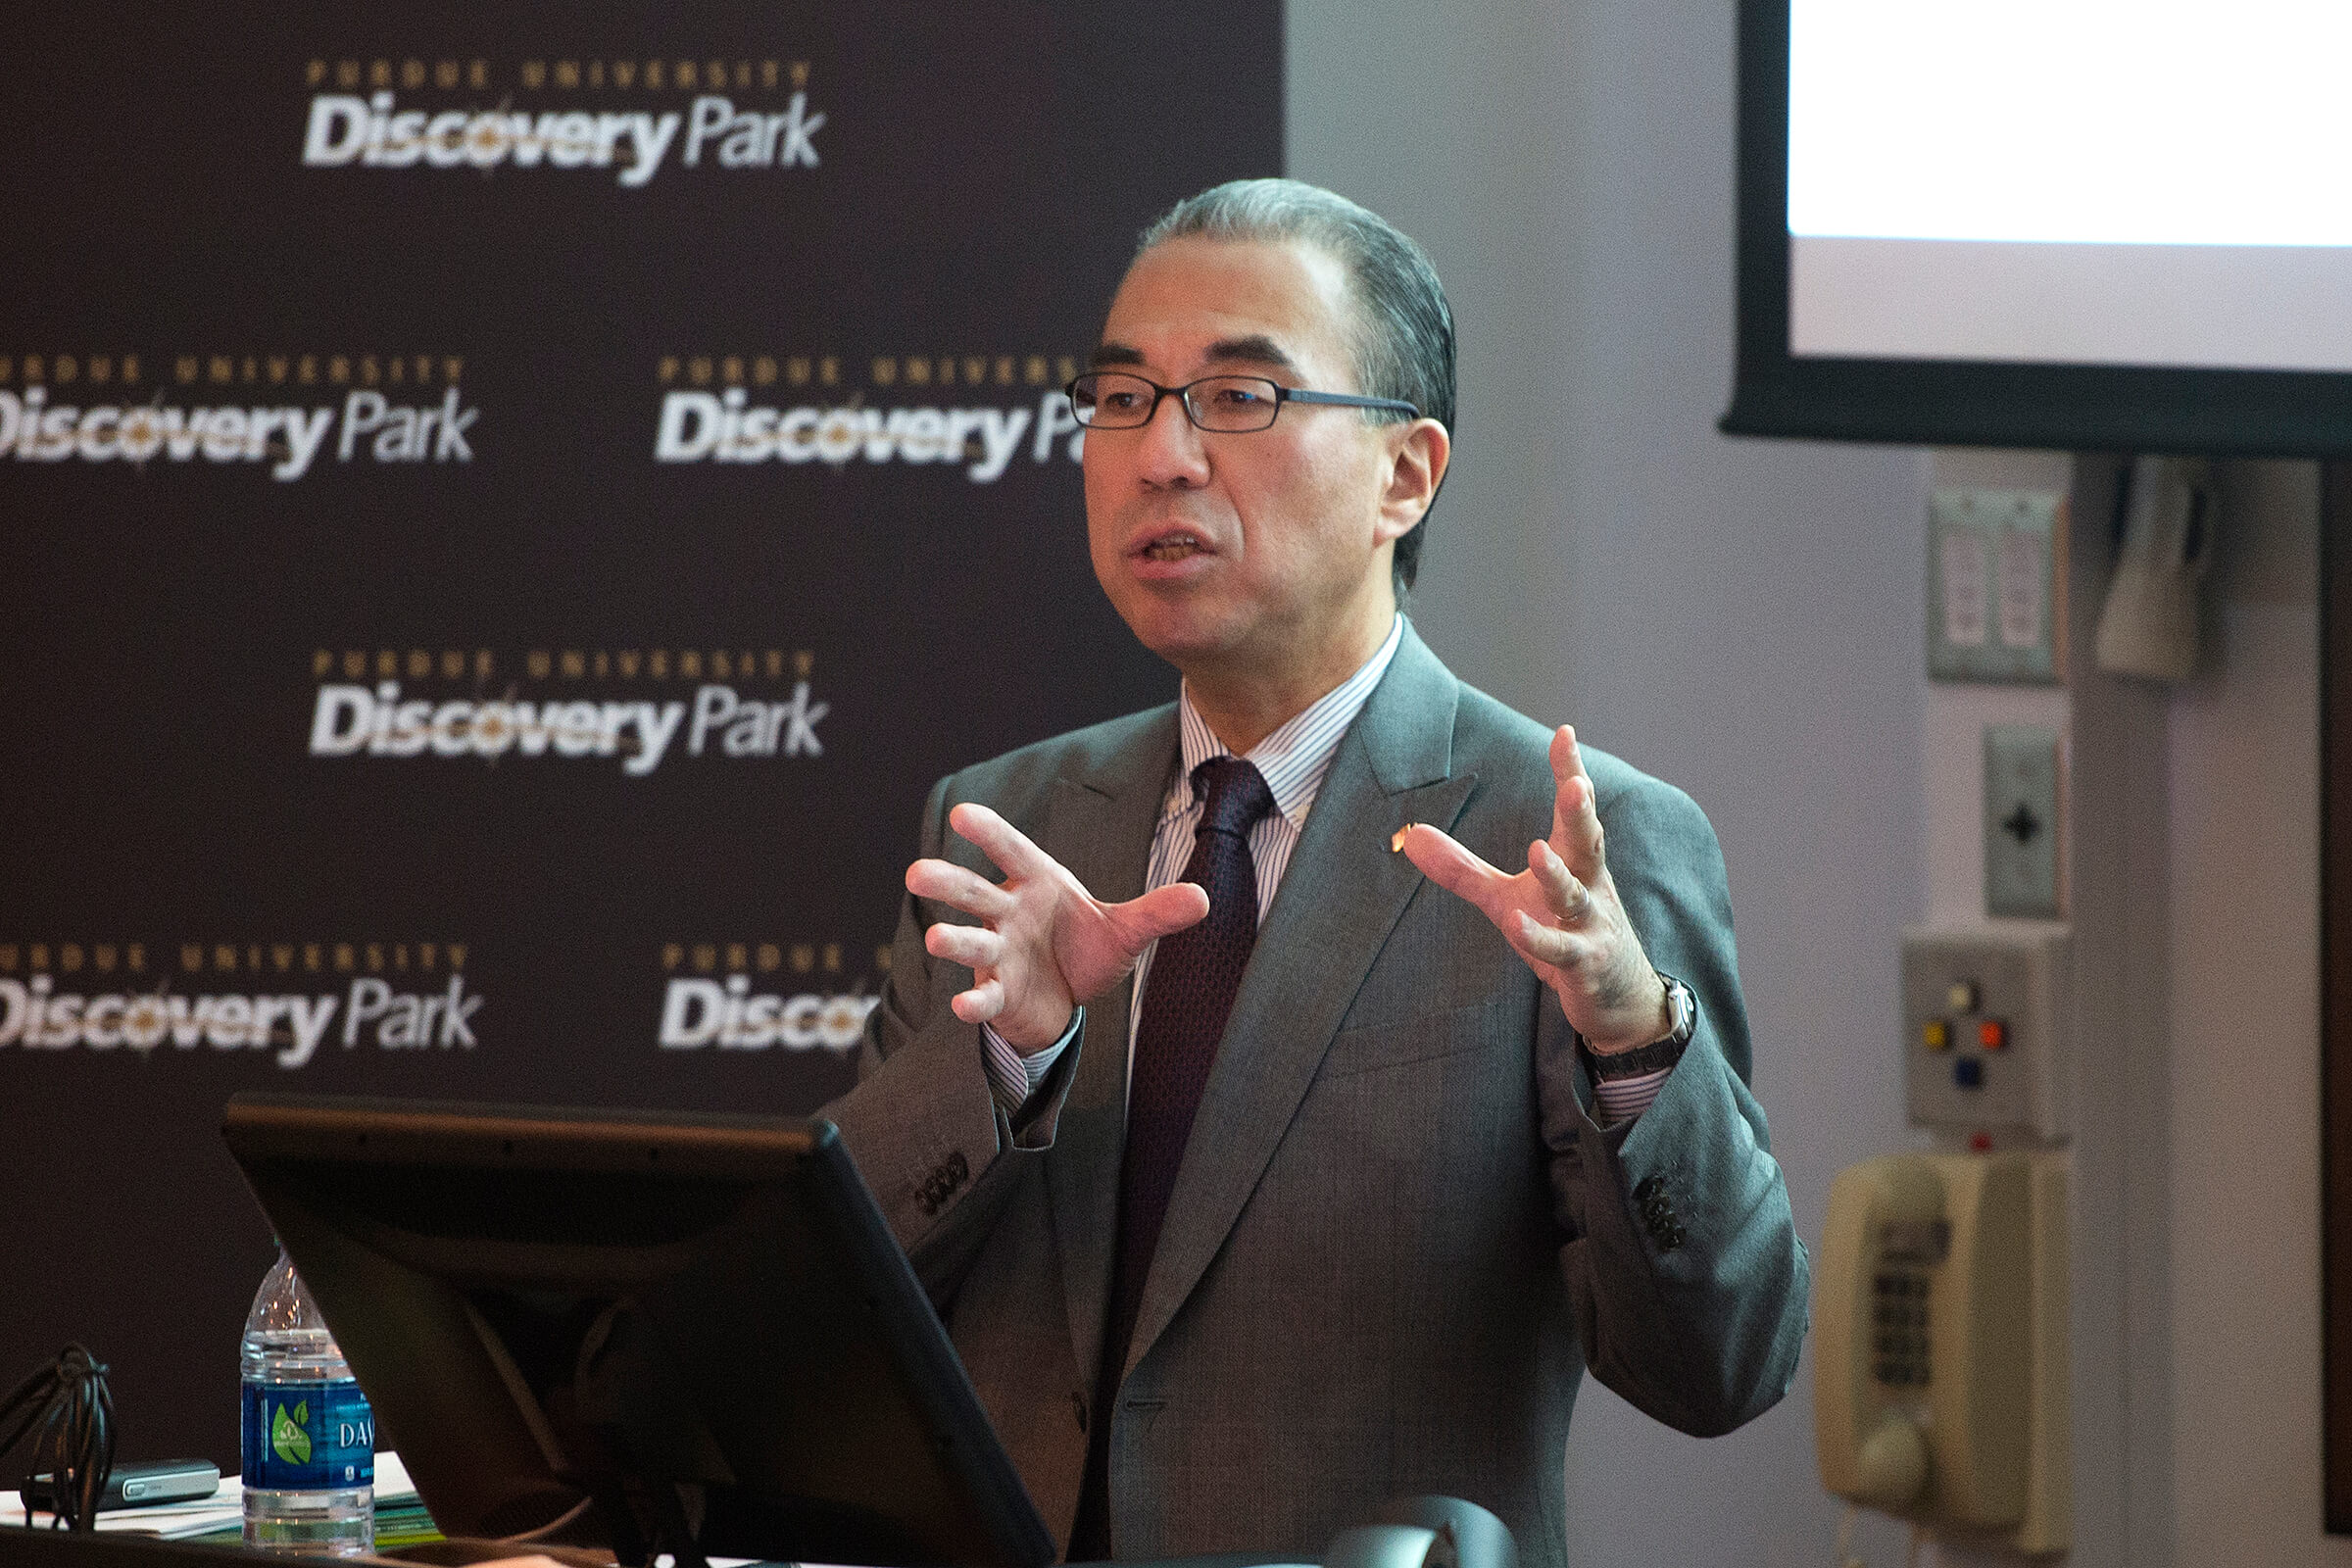 Japan embassy official speaks on campus as Discovery Park